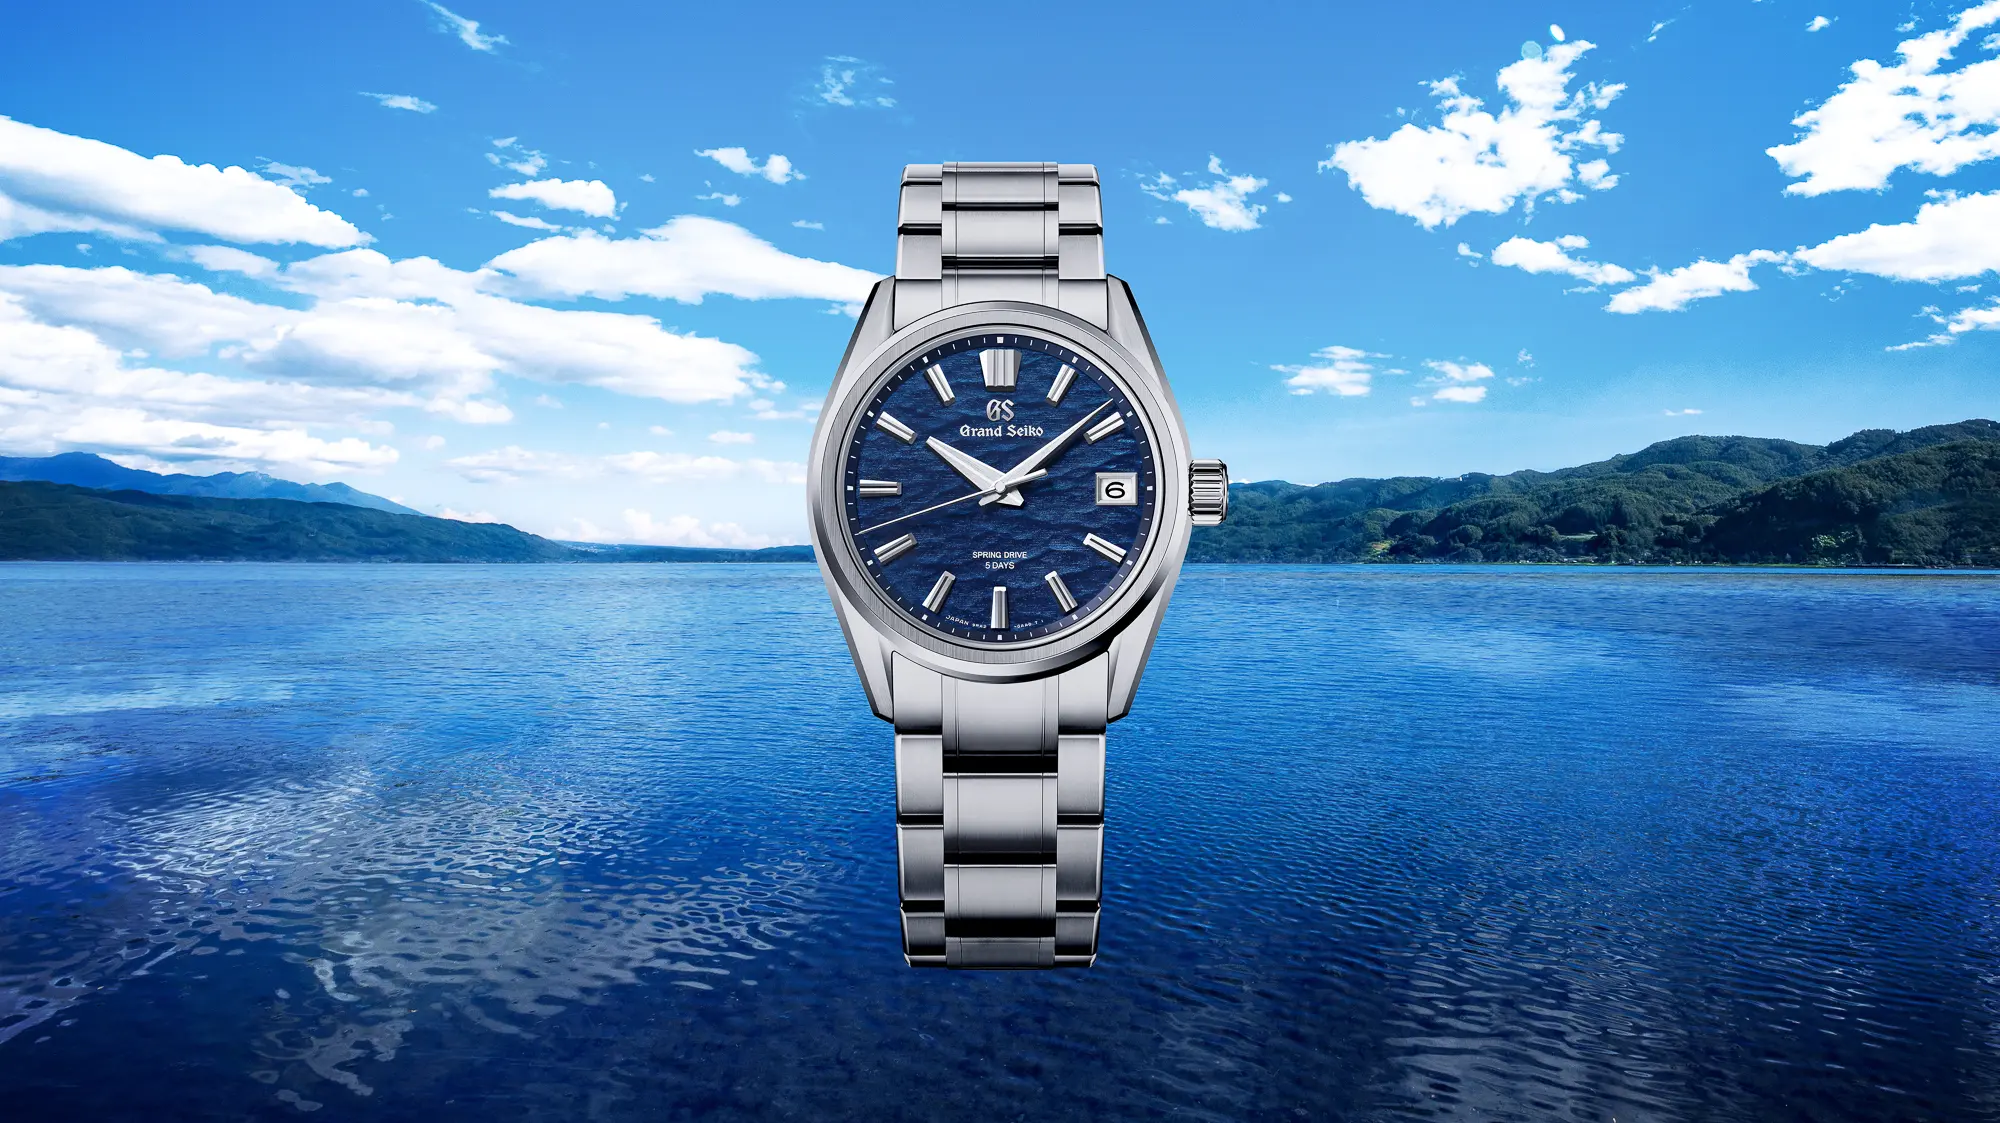 Grand Seiko Evolution 9 Spring Drive watch with blue dial